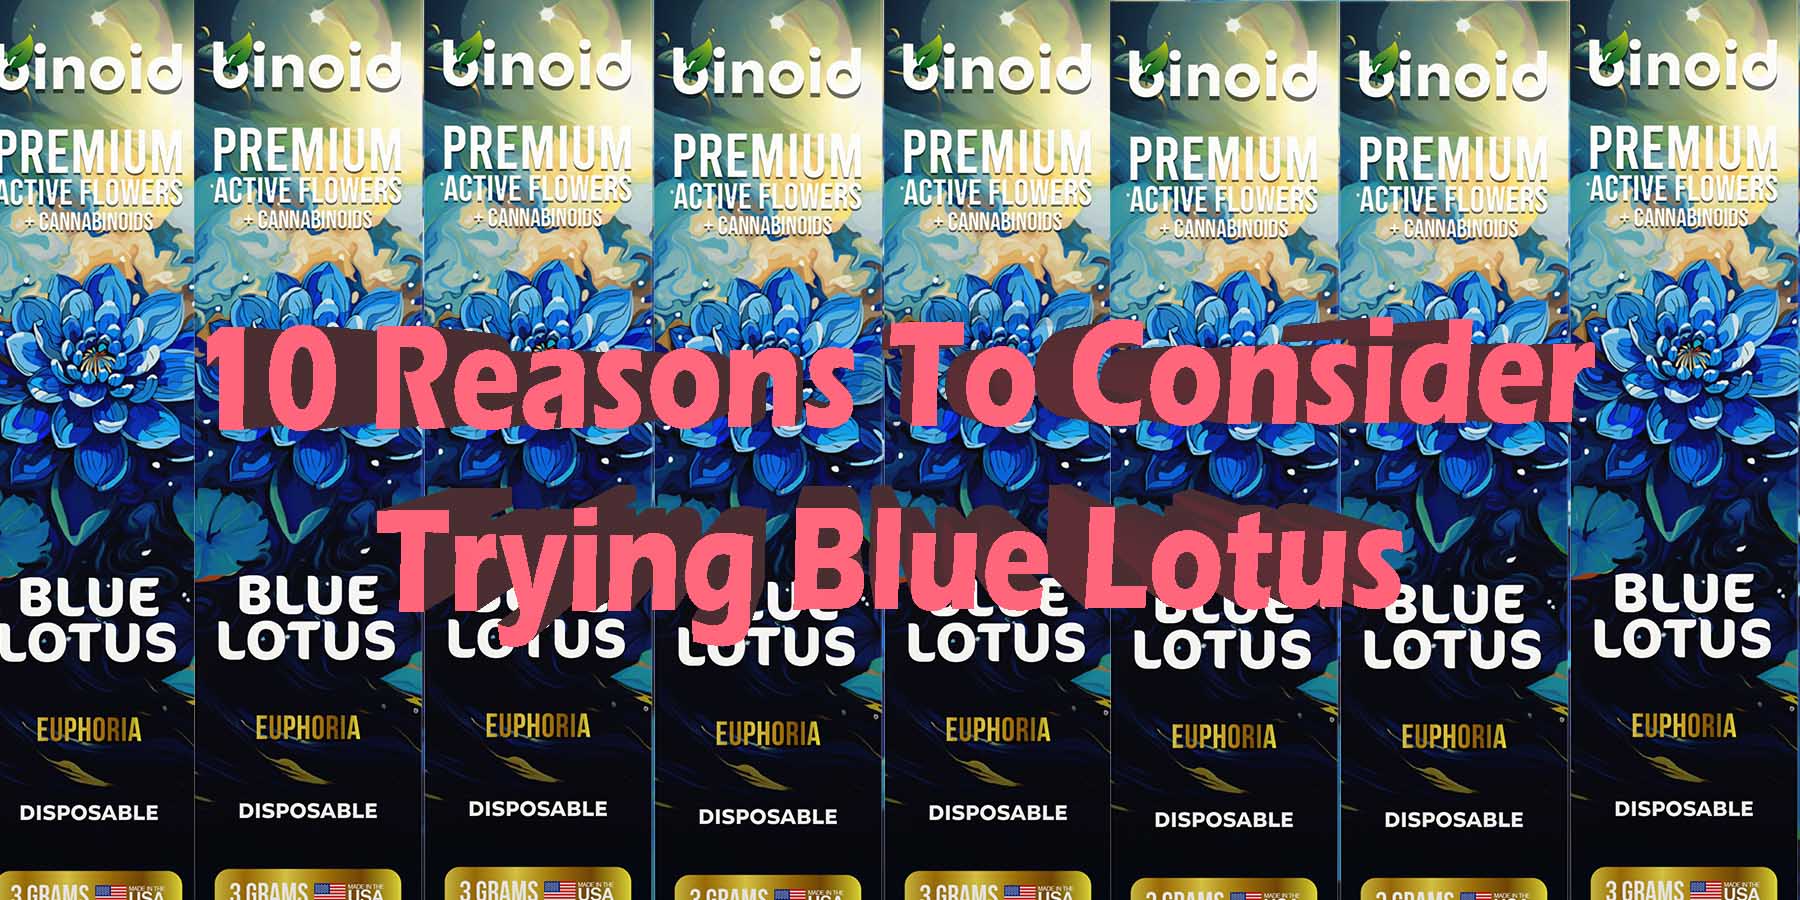 10 Reasons To Consider Trying Blue Lotus What Are The Side Effects of Blue Lotus Hemp Flower What Is Blue Lotus Active Flowers Mushrooms Cannabinoids WhereToBuy HowToBuy Strongest